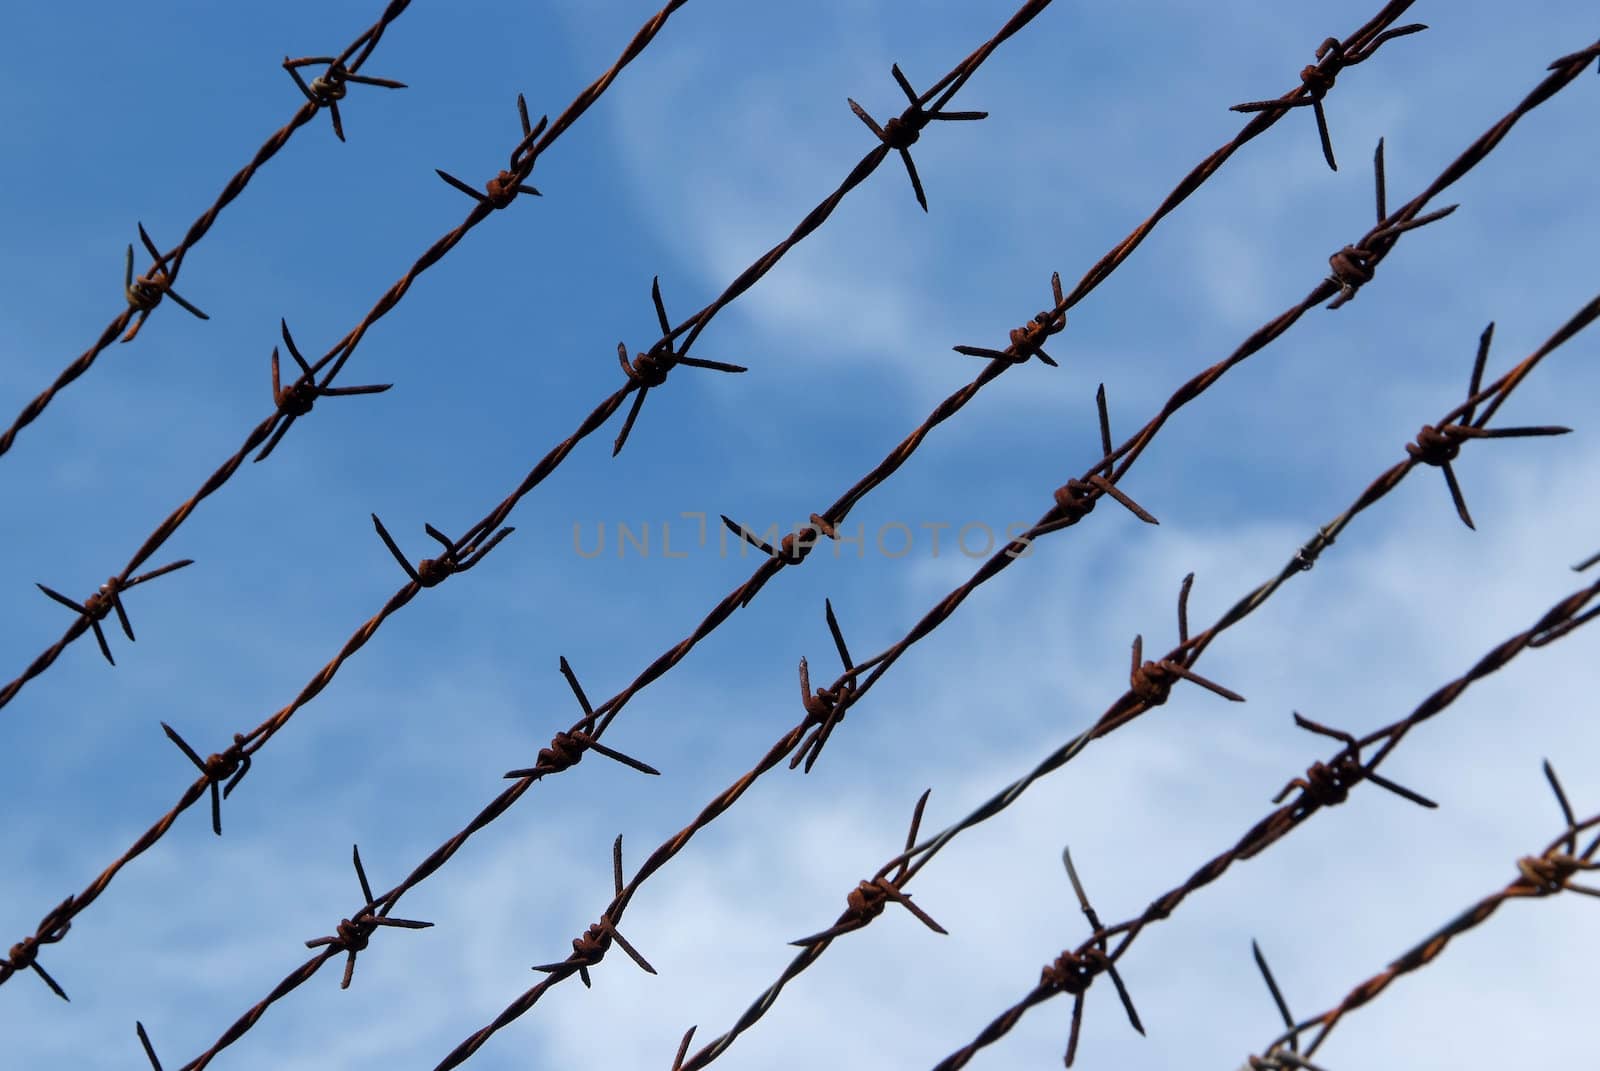 Barb wire fence and blue sky blackground